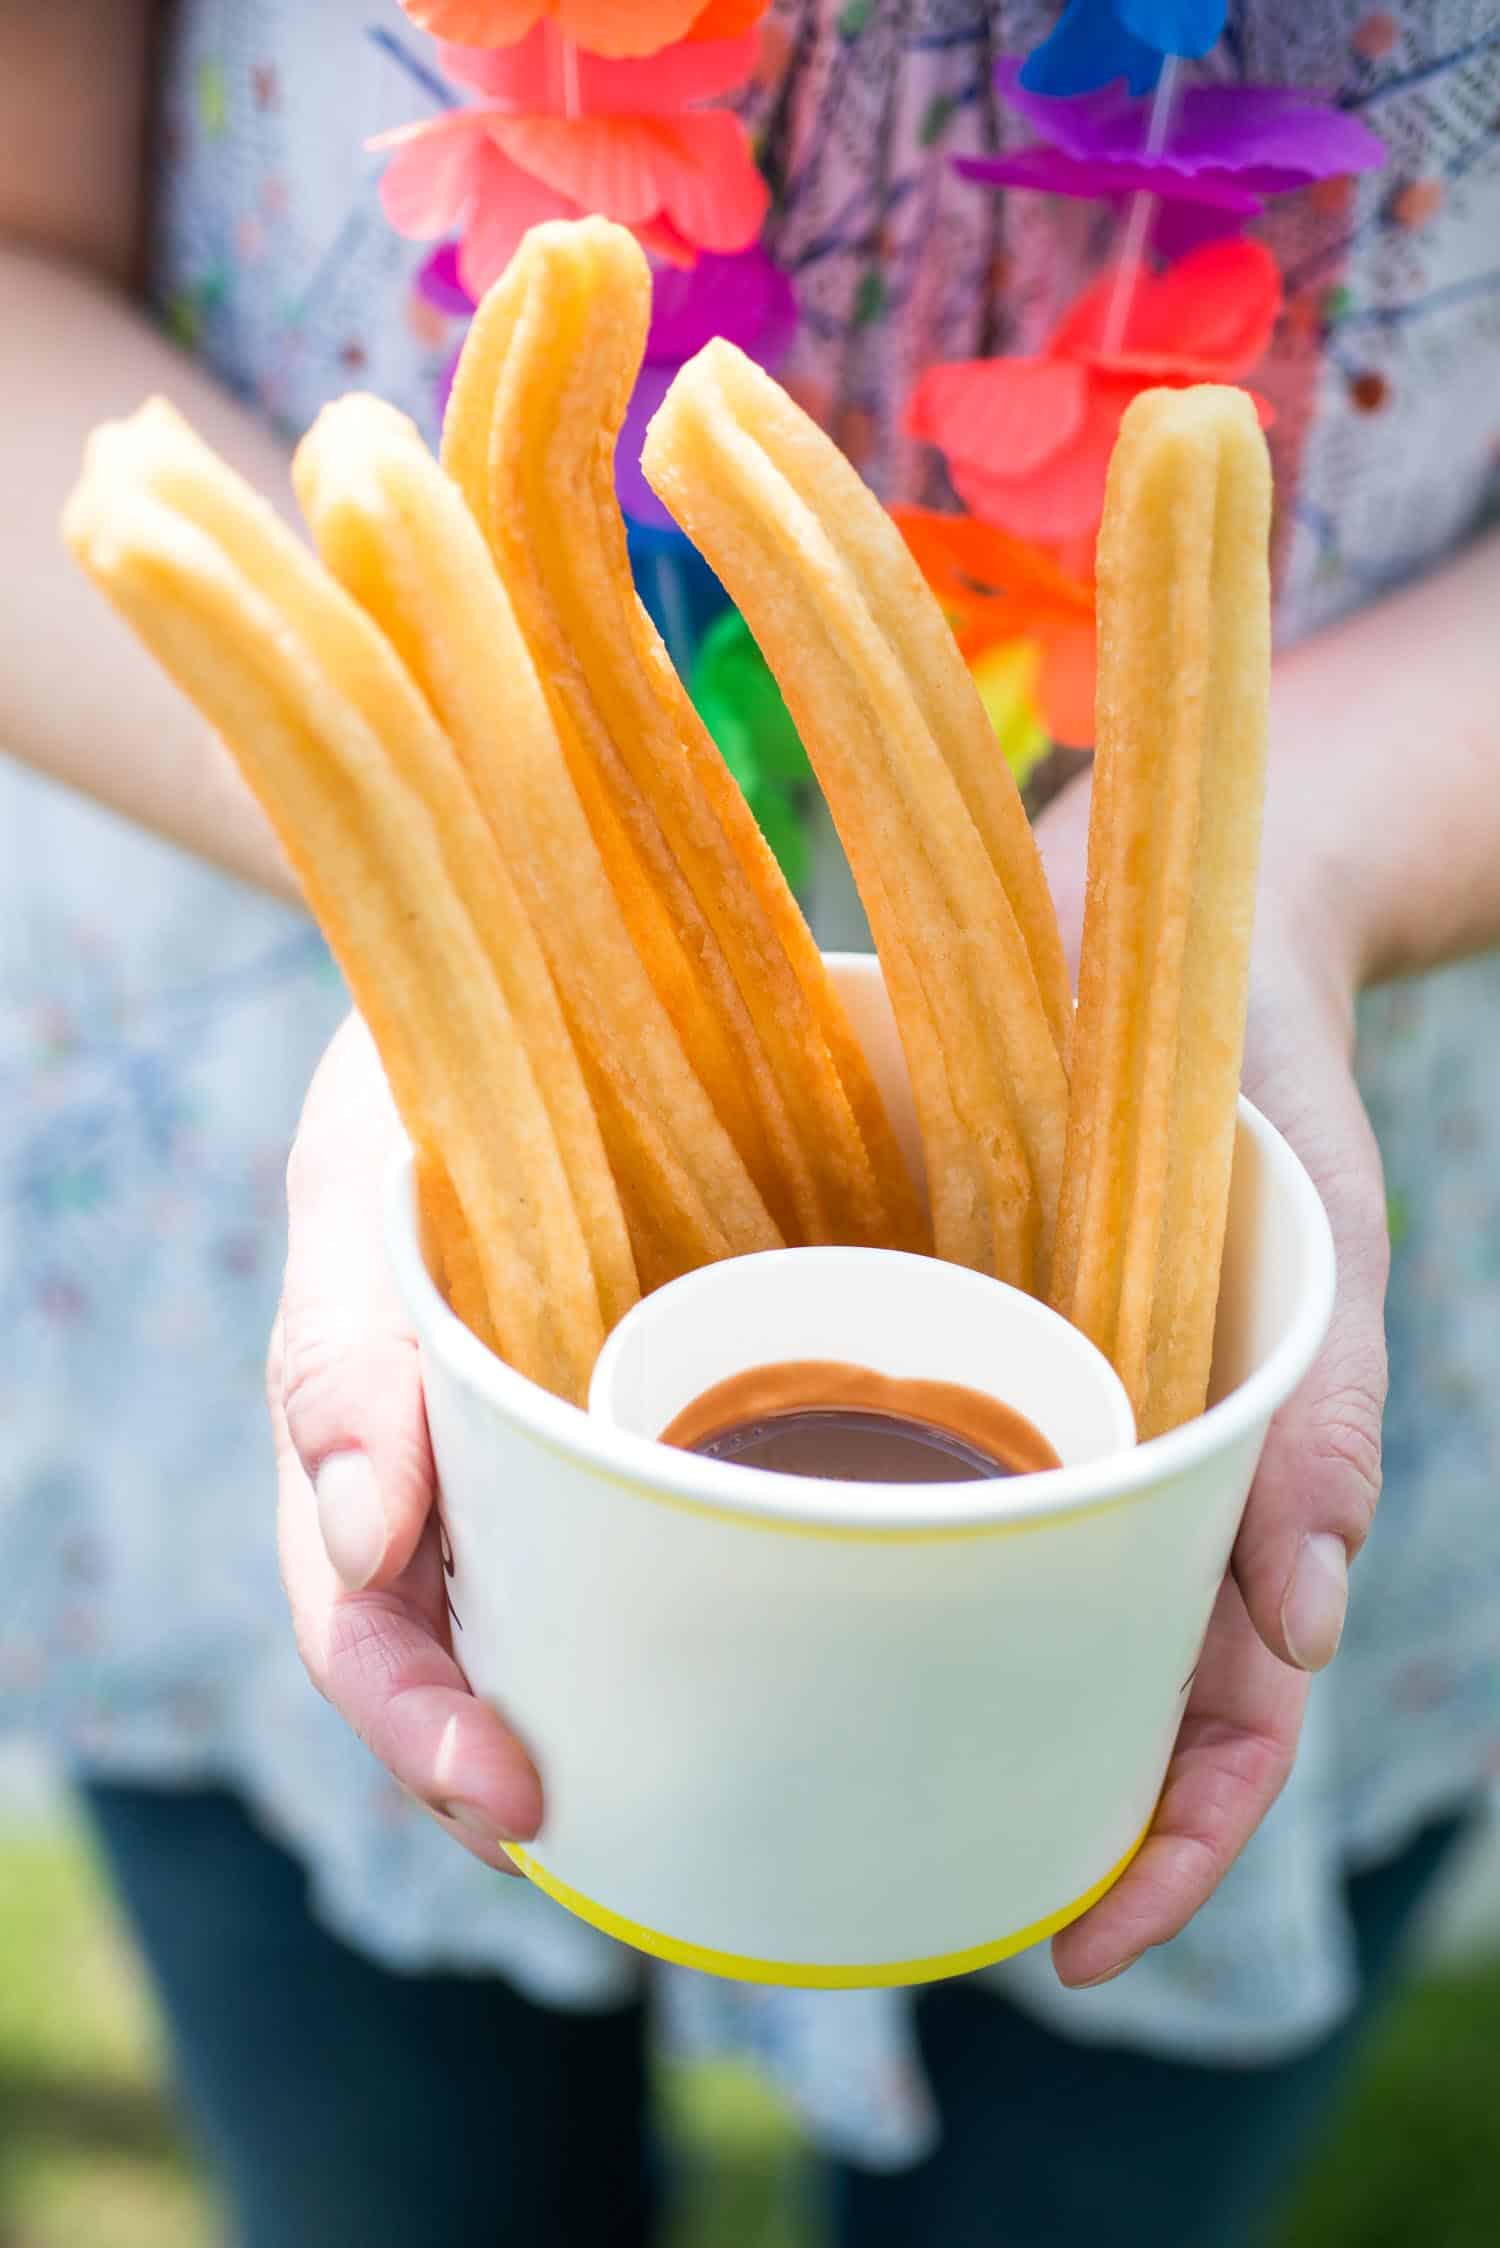 Churros are one of the most popular Costa Rican desserts.